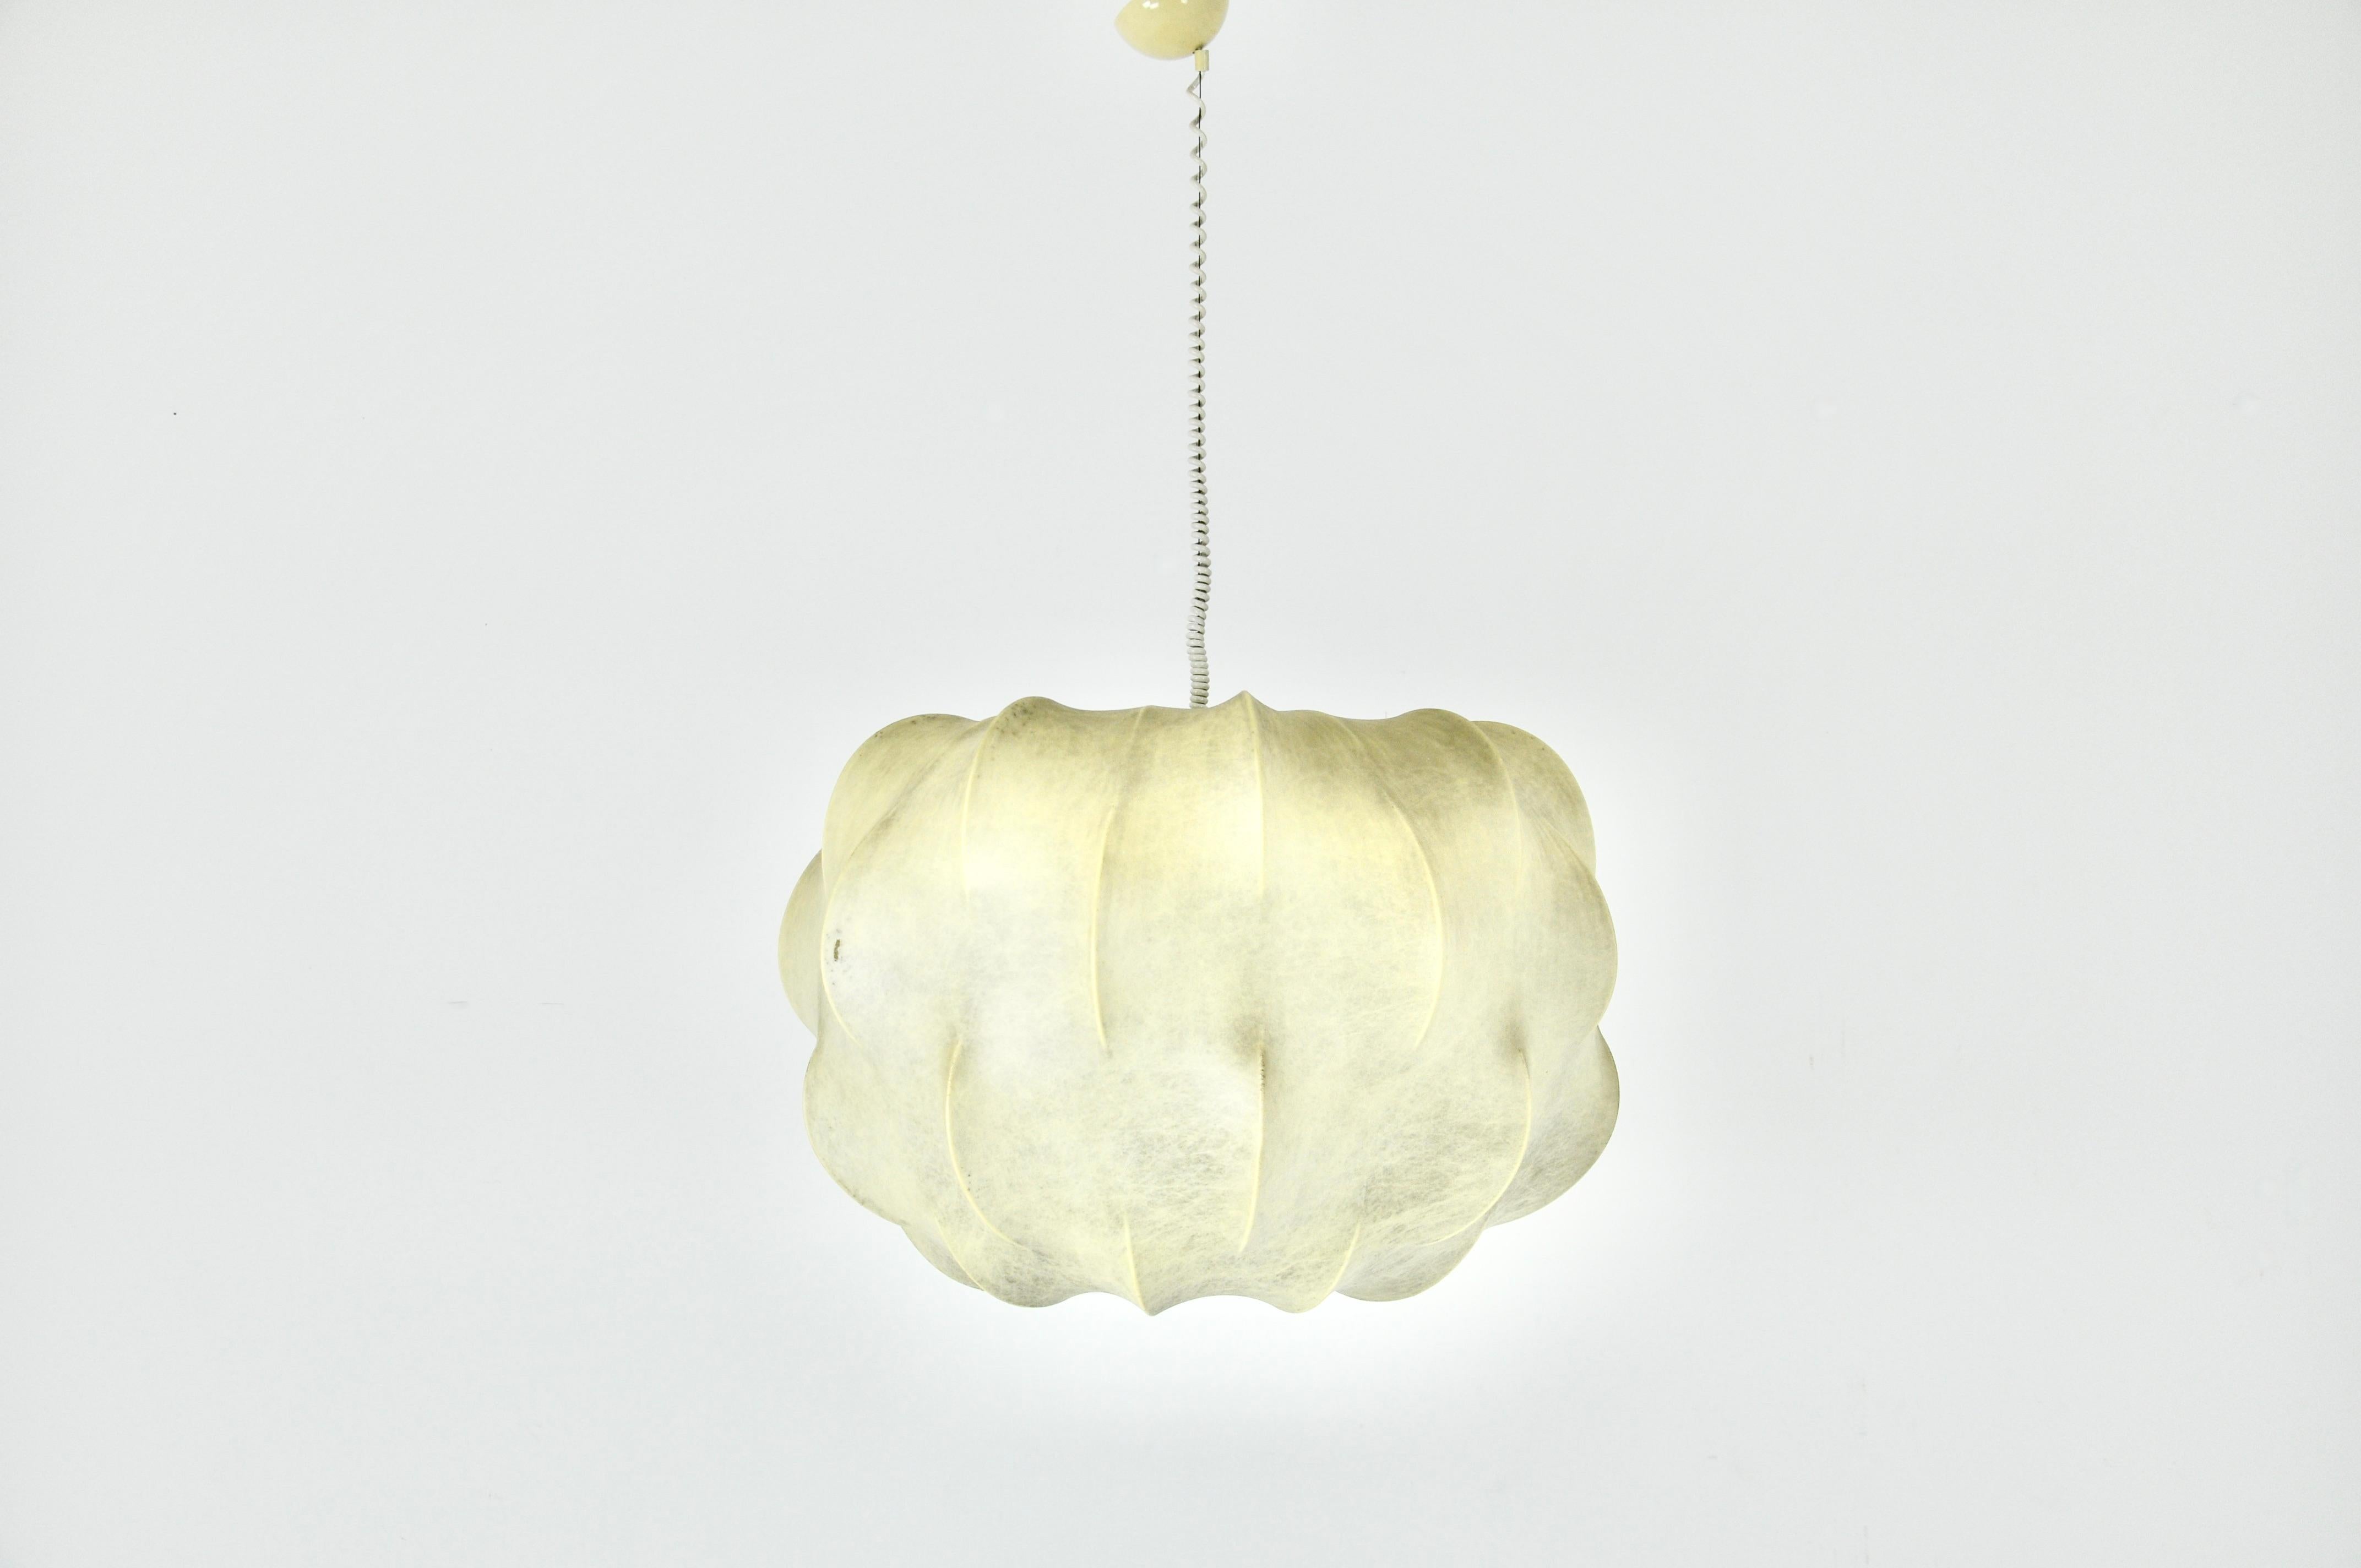 Italian Large Nuvola Hanging Lamp by Achille & Pier Giacomo Castiglioni for Flos, 1960s